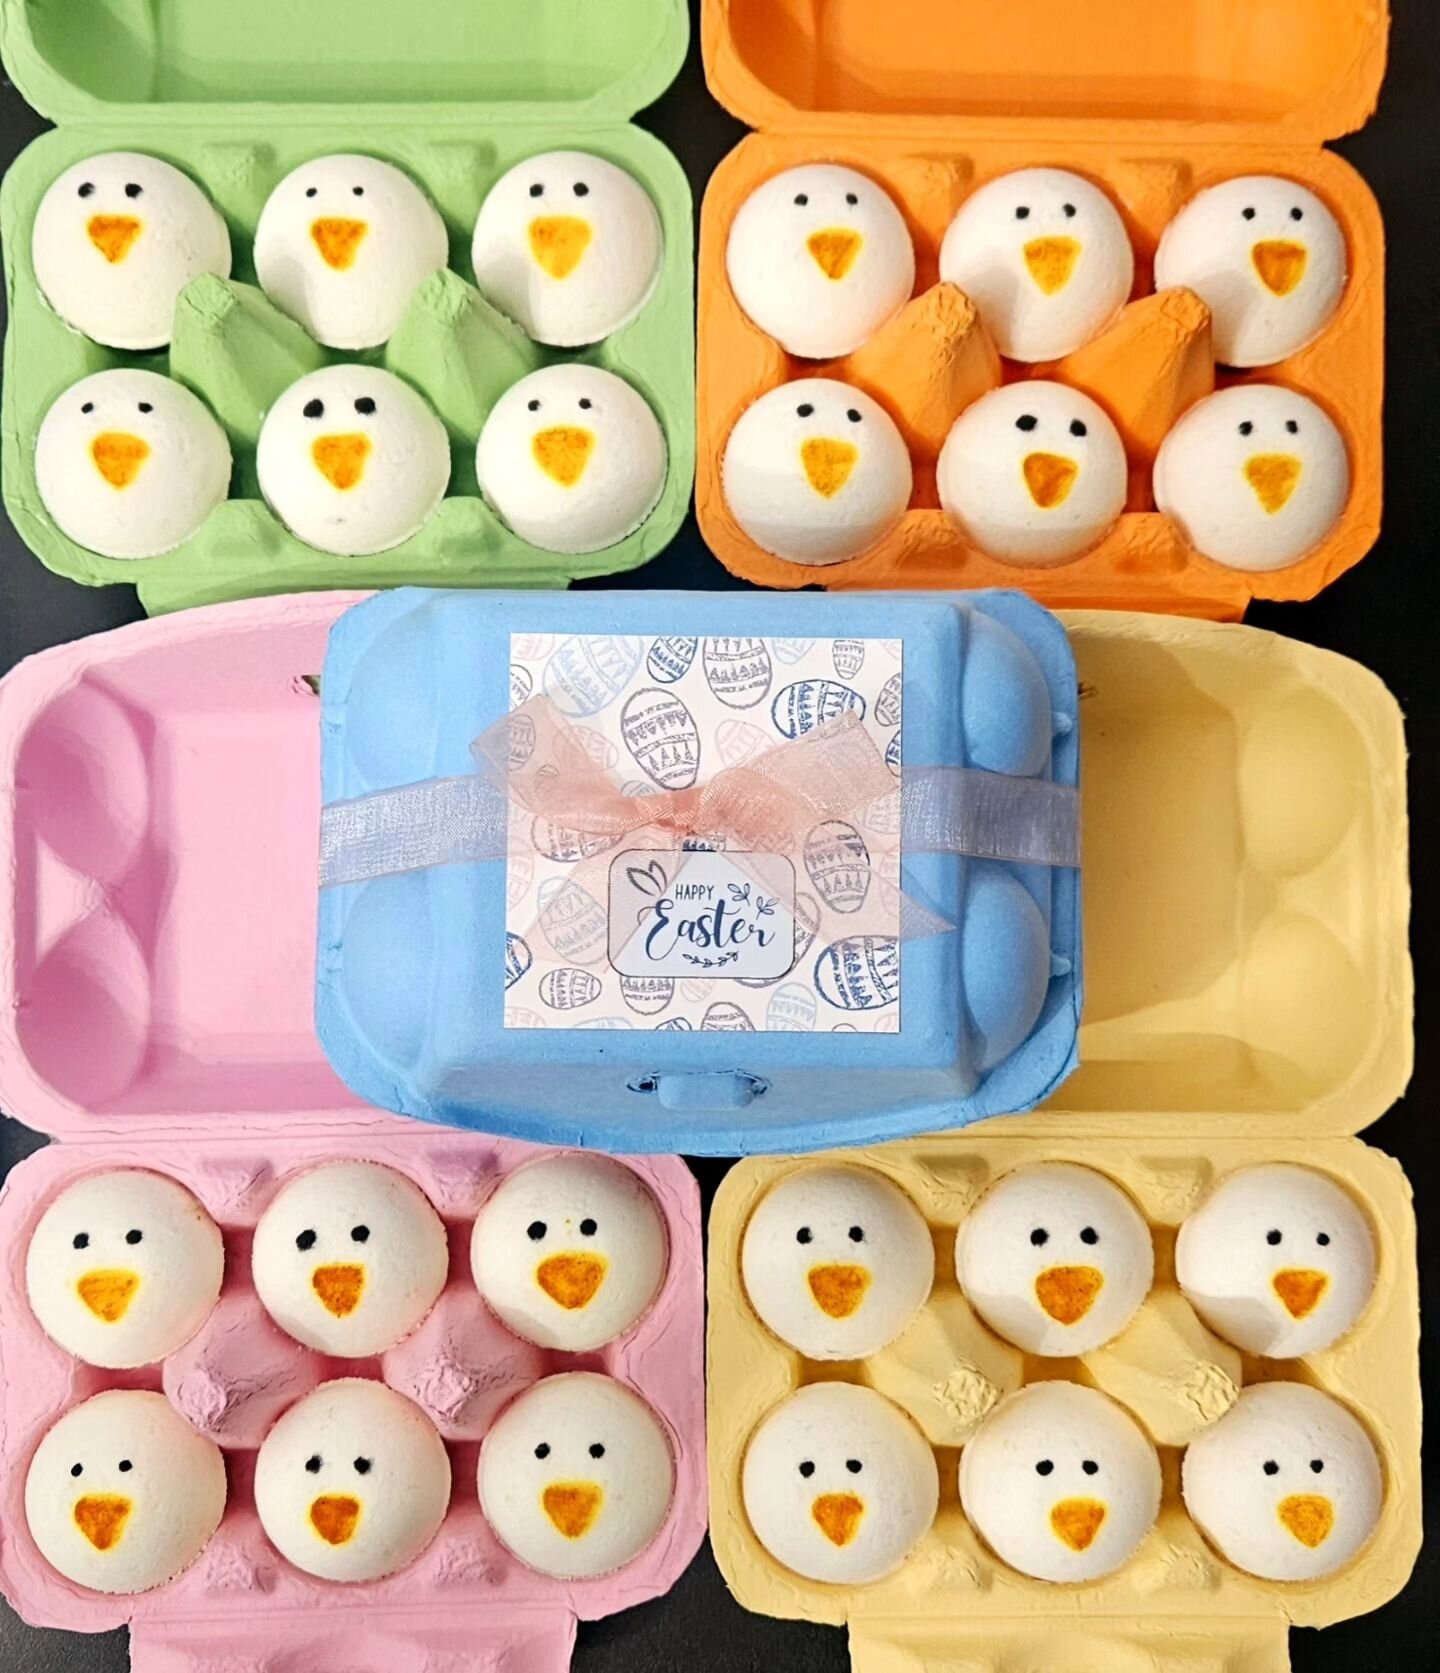 We have many cute Easter goodies at Tiani! 🐥🌷🐣

Lots of little treats to add to fun, color, and nice smells to an Easter basket. 

✨️Unwrapped large chick bath bomb $3.50
✨️Wrapped large chick bath bomb $4.50
✨️6-Pack small chick bath bomb carton 